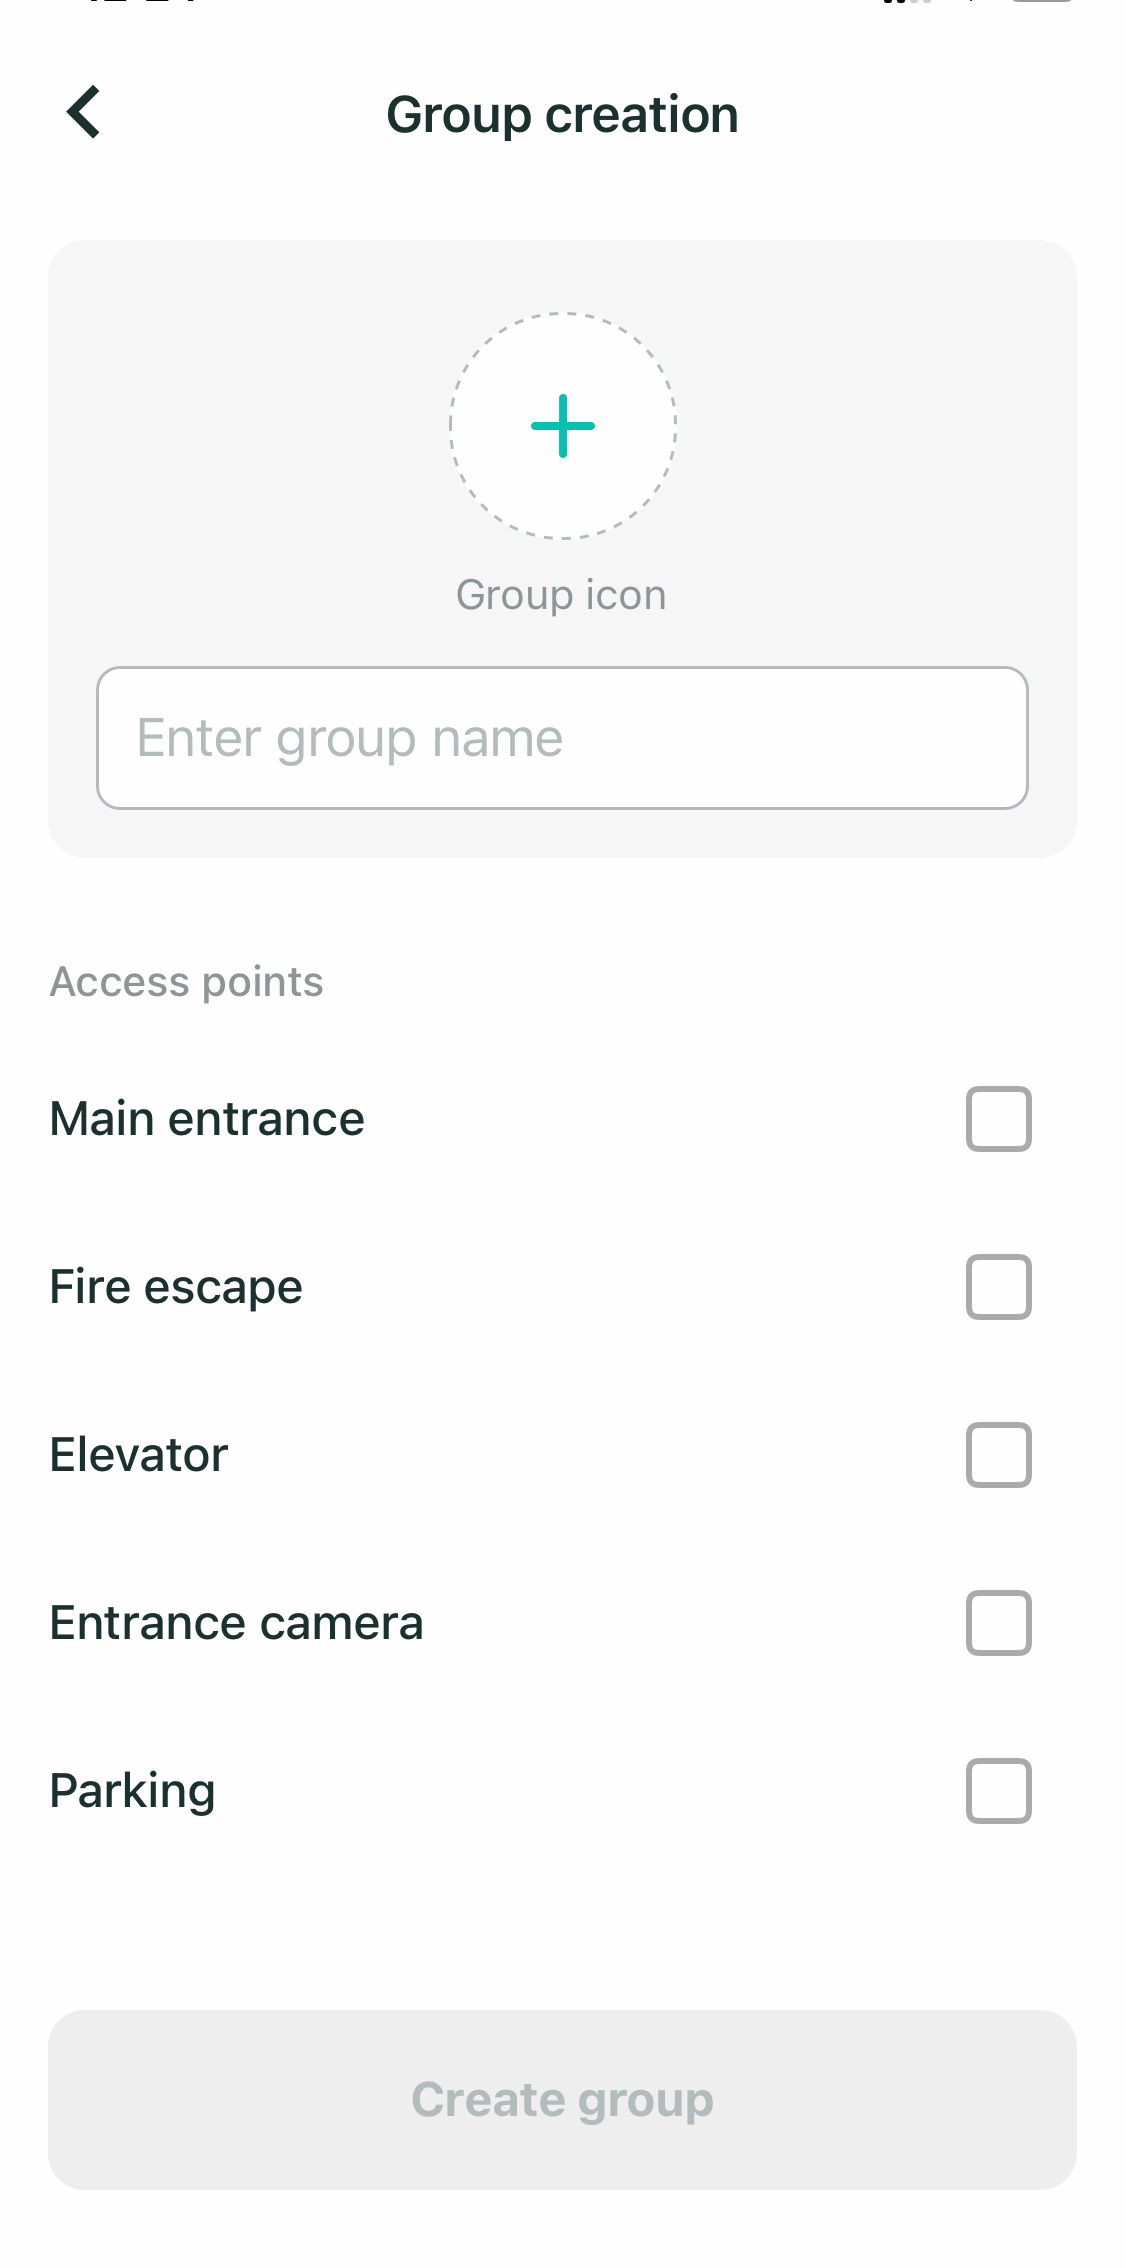 Grouping access points